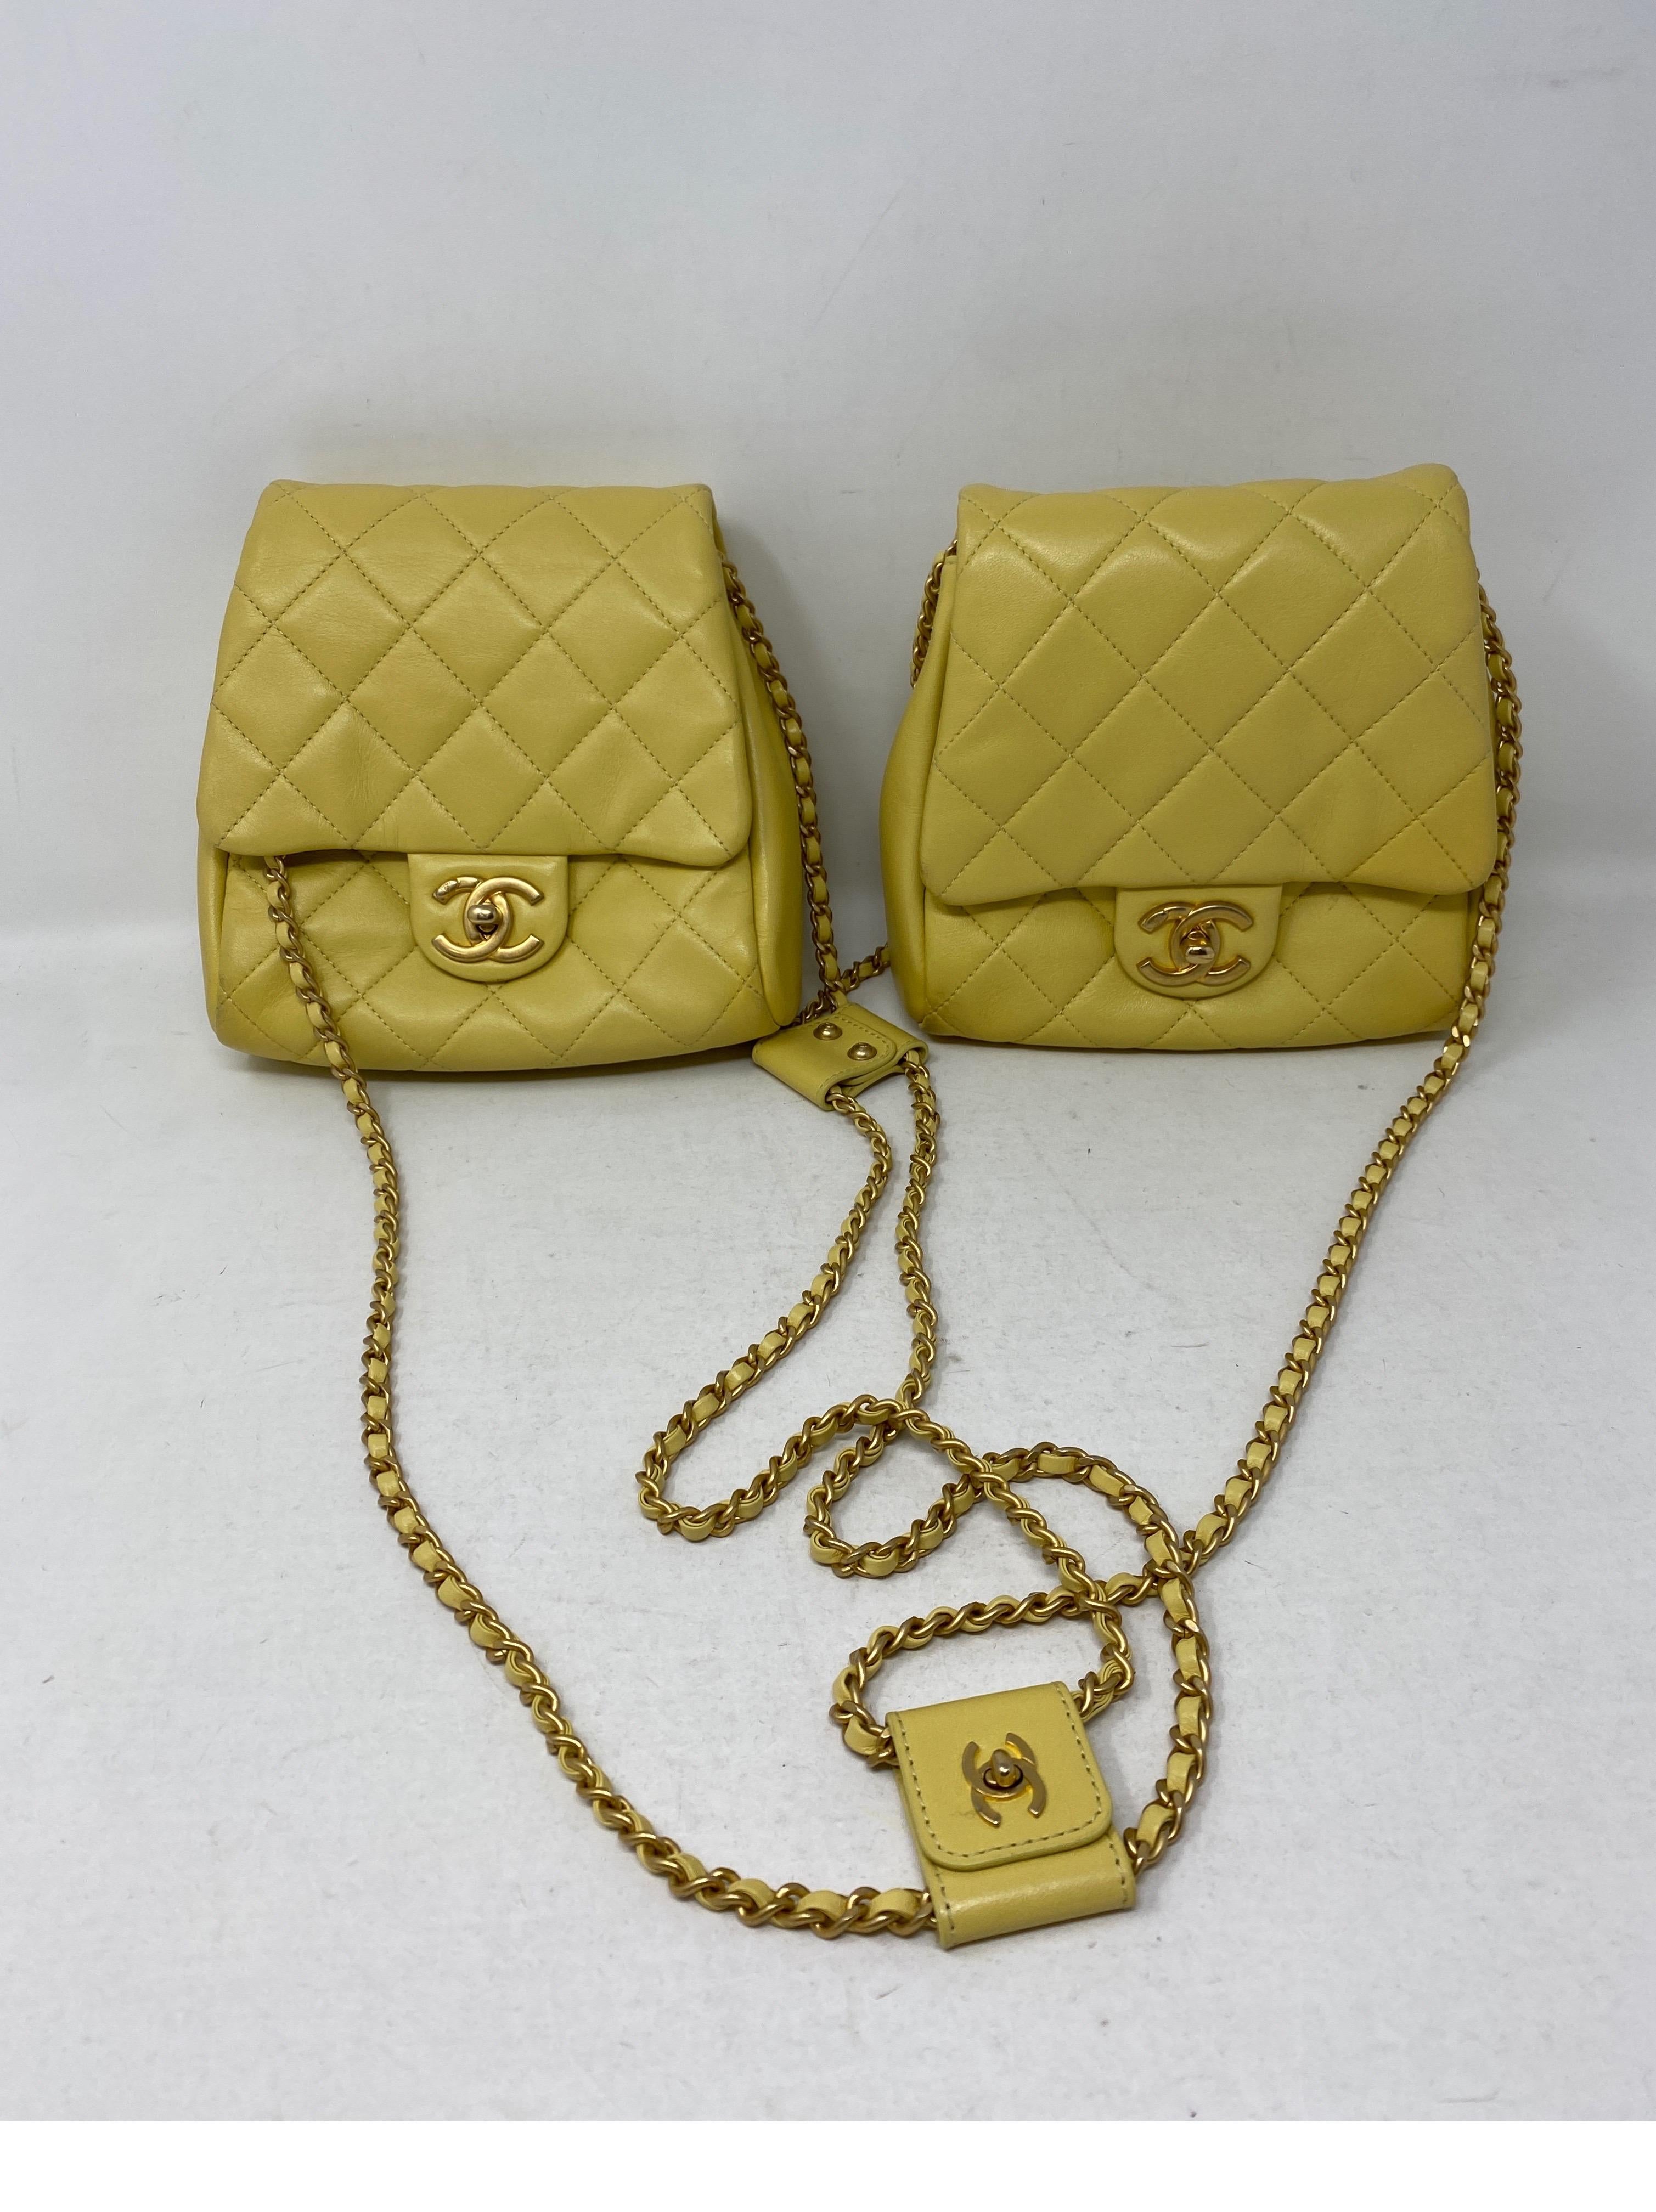 Chanel Yellow Medium Side-Packs Bag. Runway 2019 most wanted bag. Goldtone hardware. Two bags in one look. Fun and unique look. Rare and limited. Has some wear on the back of one bag. Please check all photos. The bag is used but can be